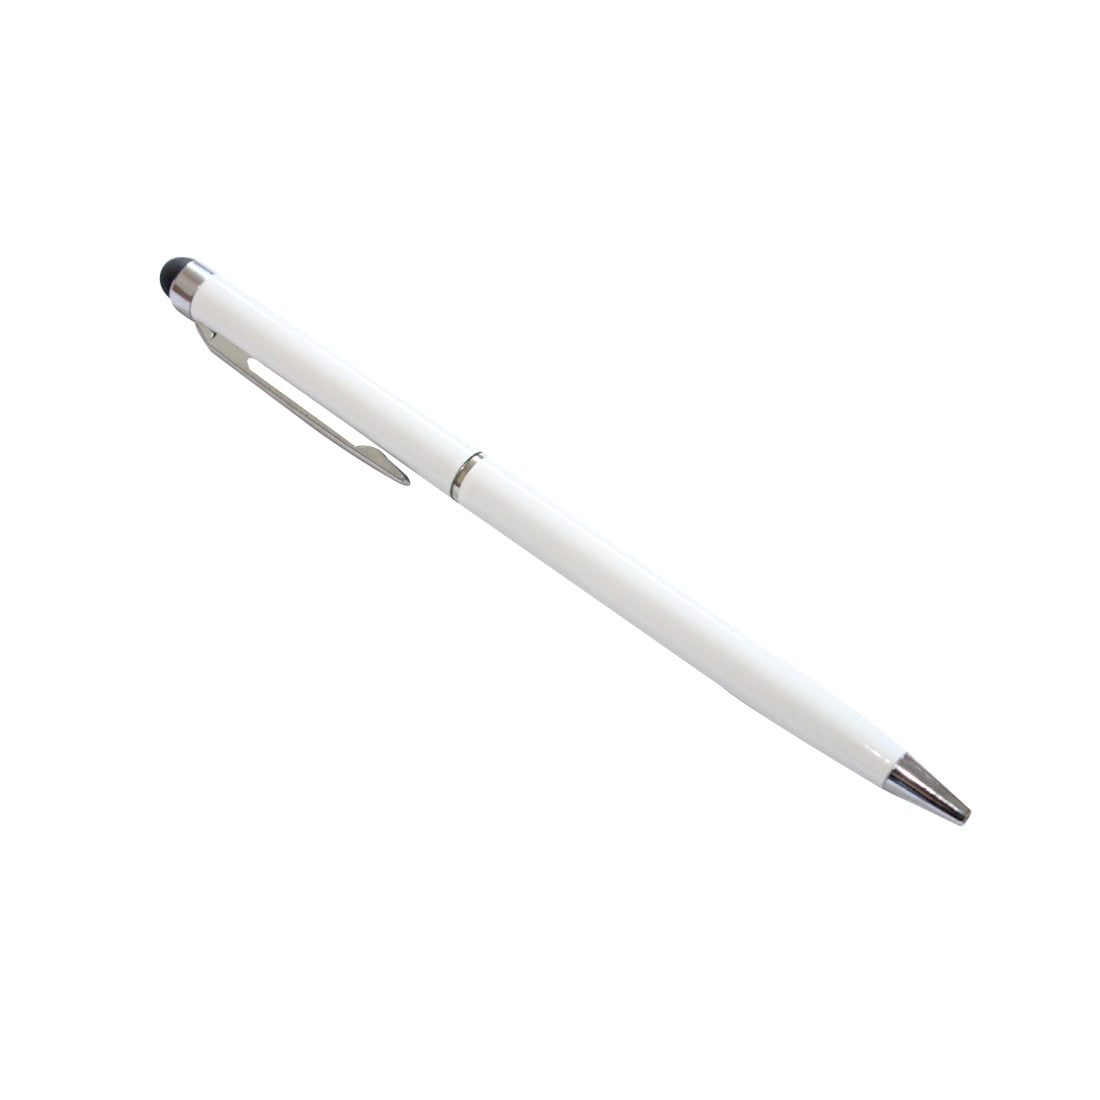 Universal 2-in-1 Microfiber Stylus Pen with Ball Point Pen